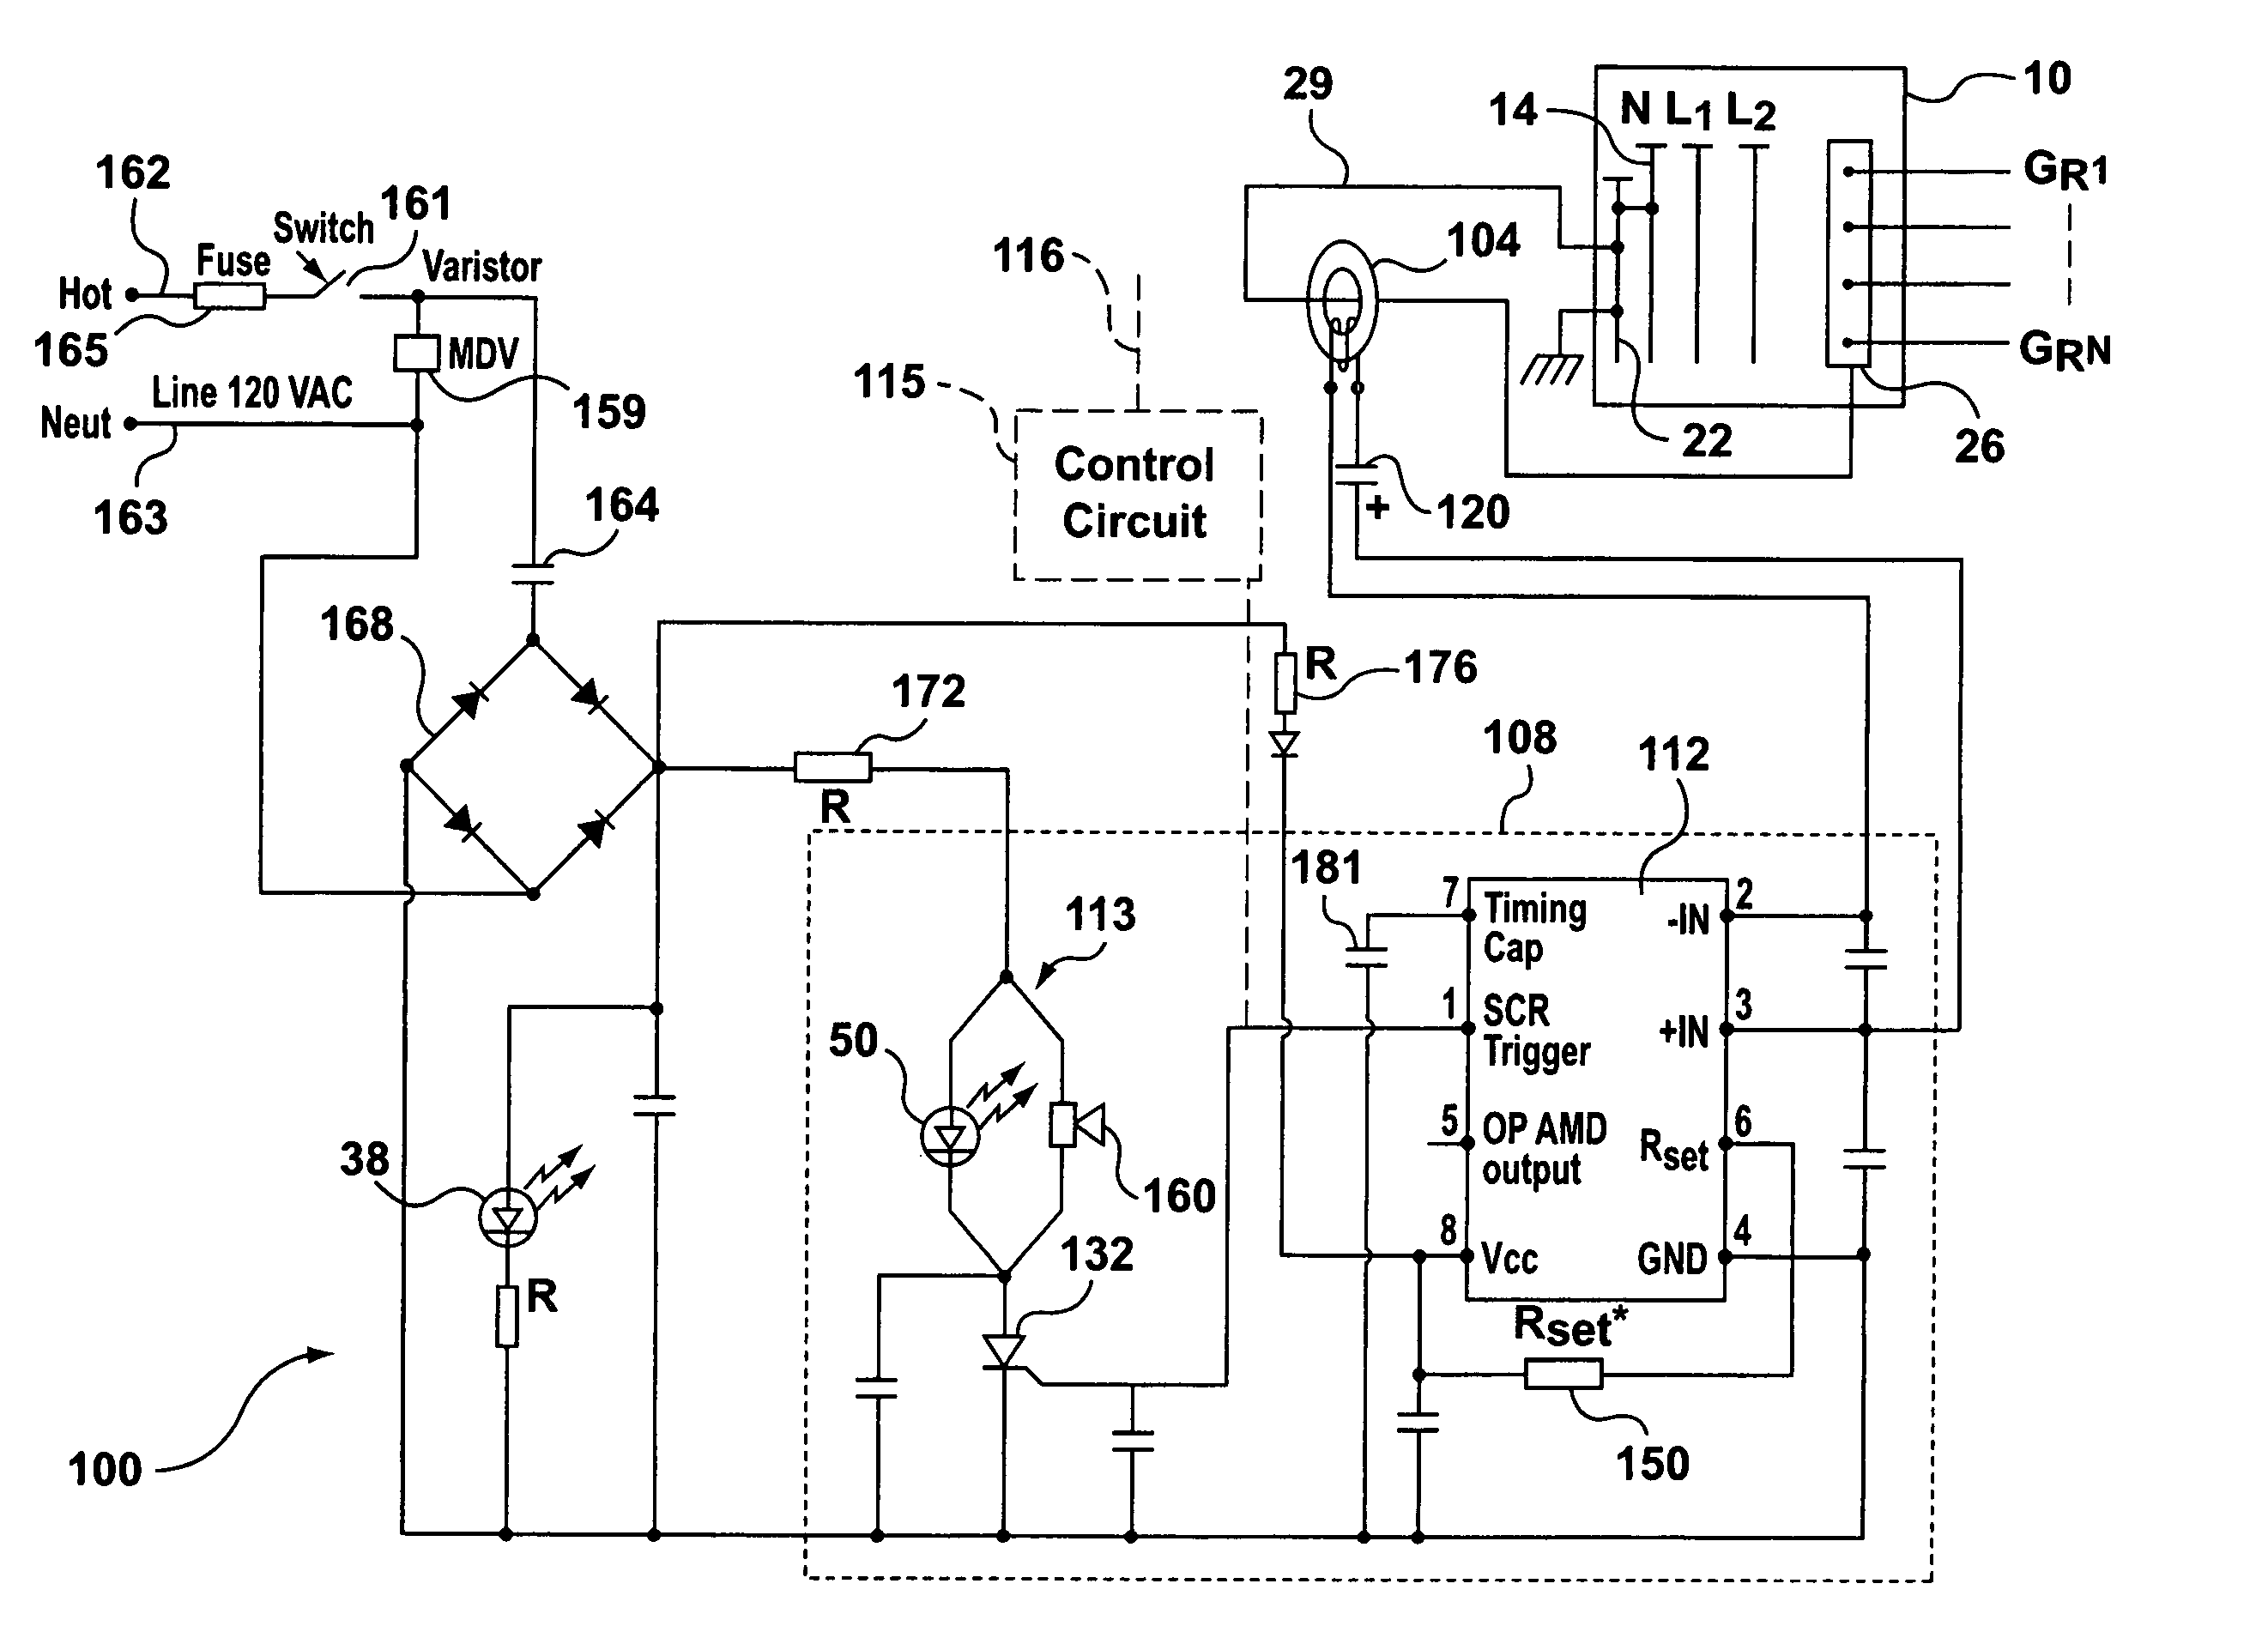 Ground-fault monitor for multiple circuits